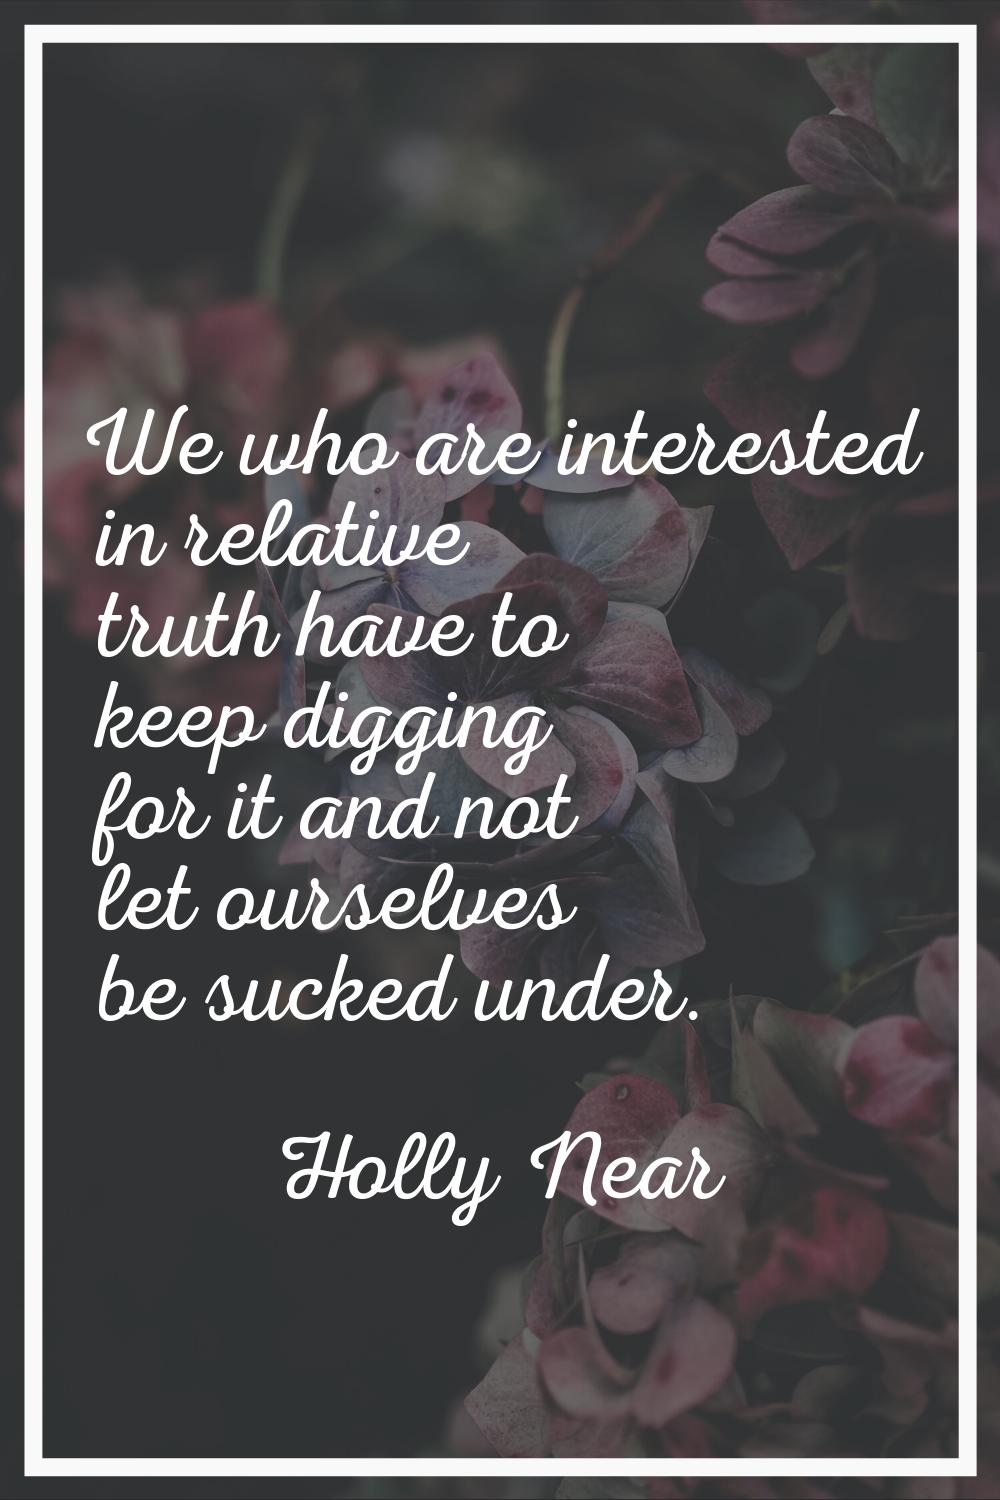 We who are interested in relative truth have to keep digging for it and not let ourselves be sucked